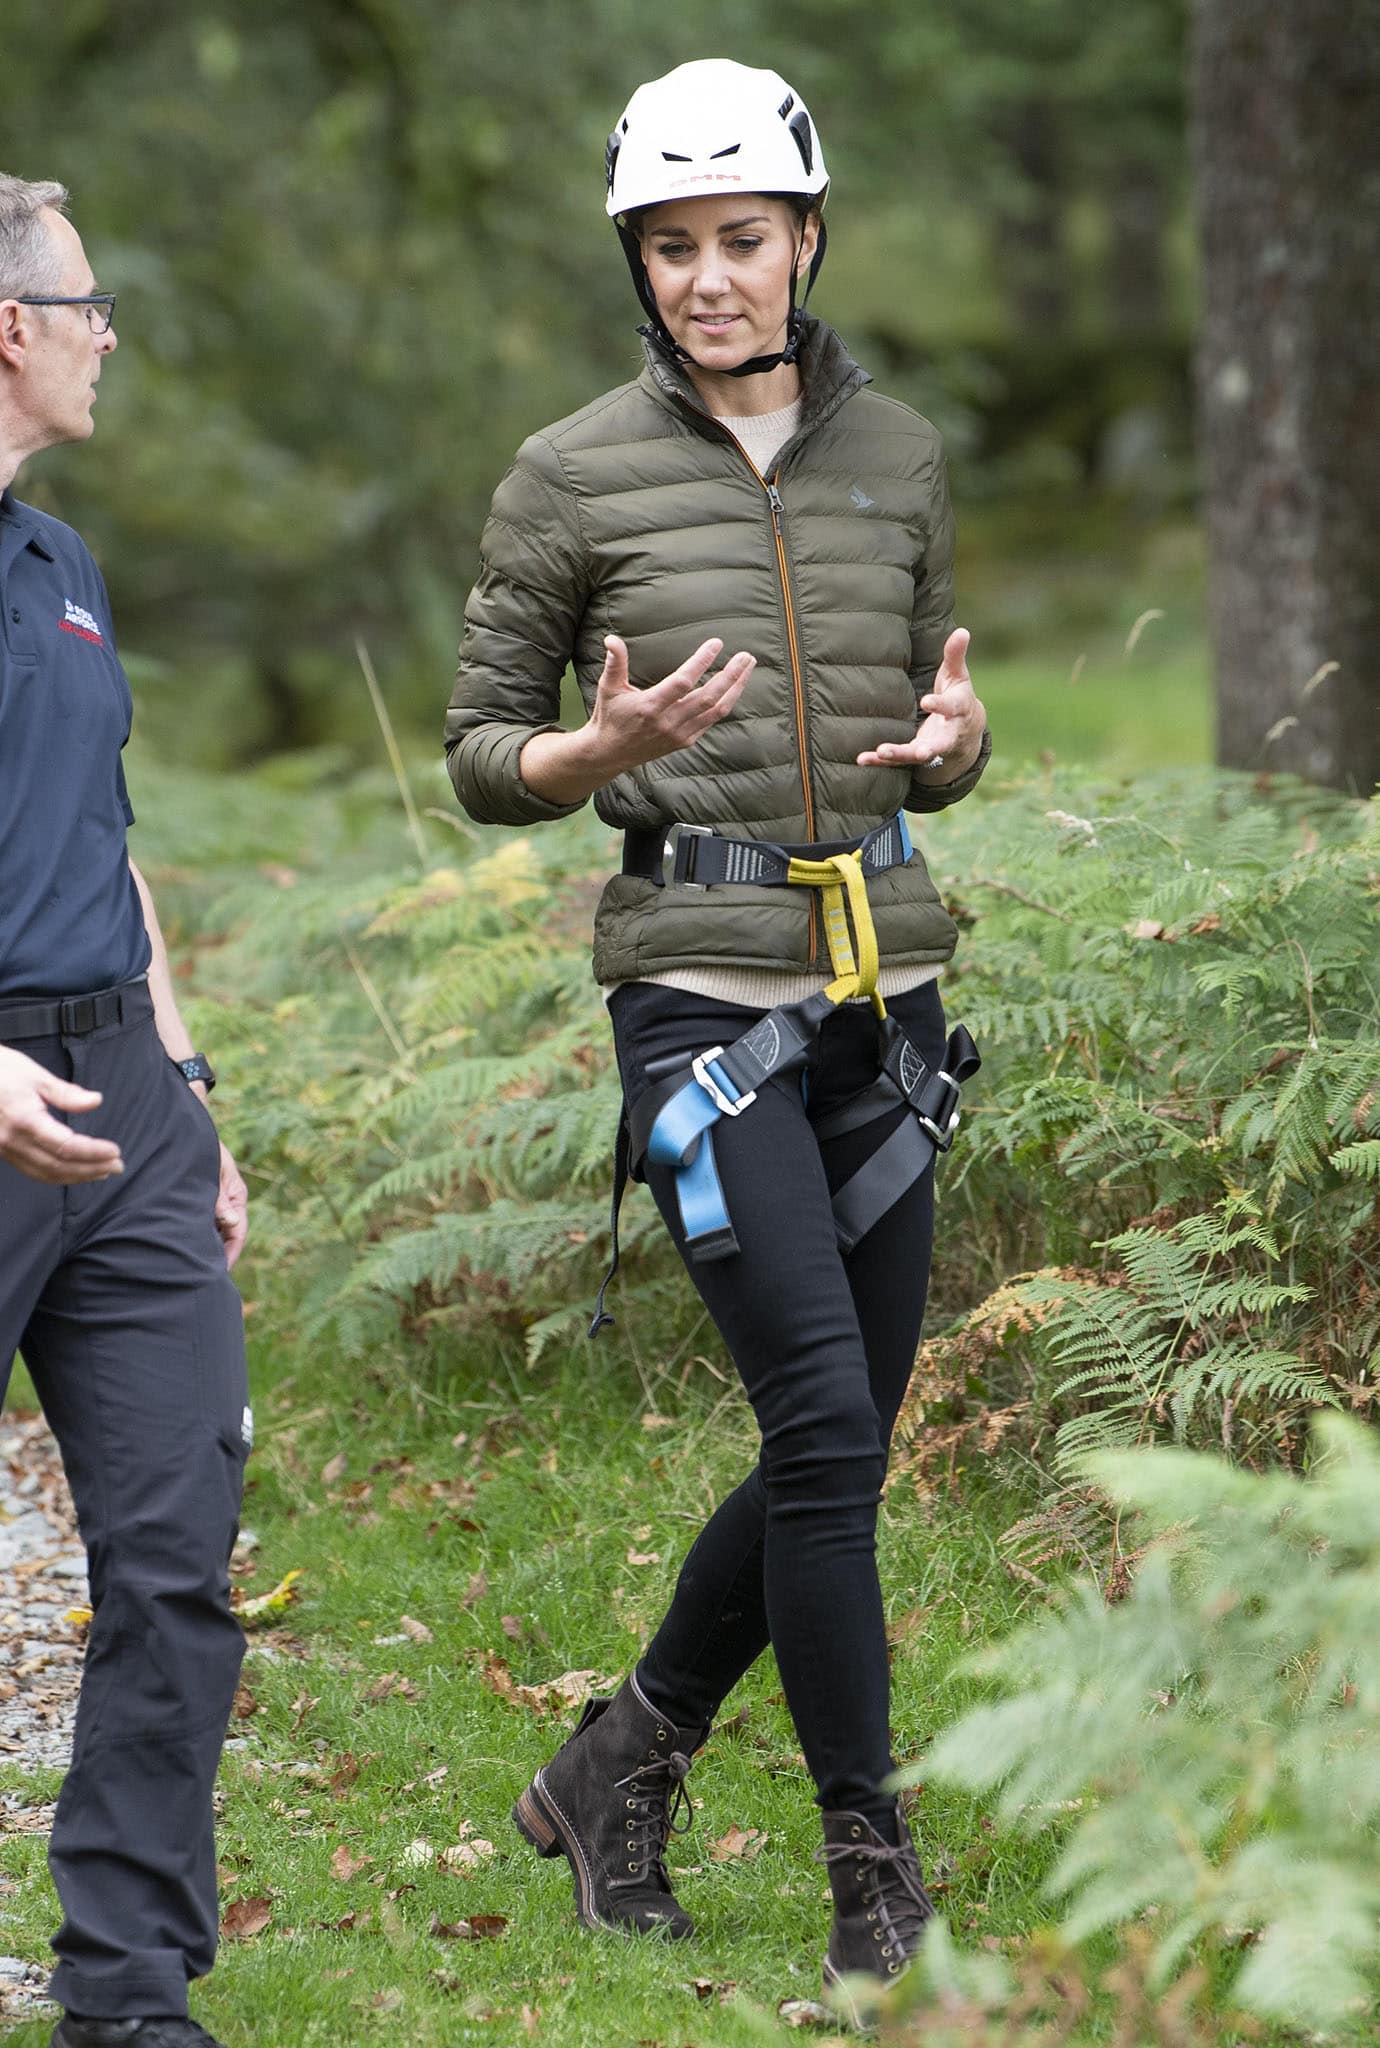 Kate Middleton pairs a Seeland Hawker pine green puffer jacket with fitted black jeans for her outdoor adventure